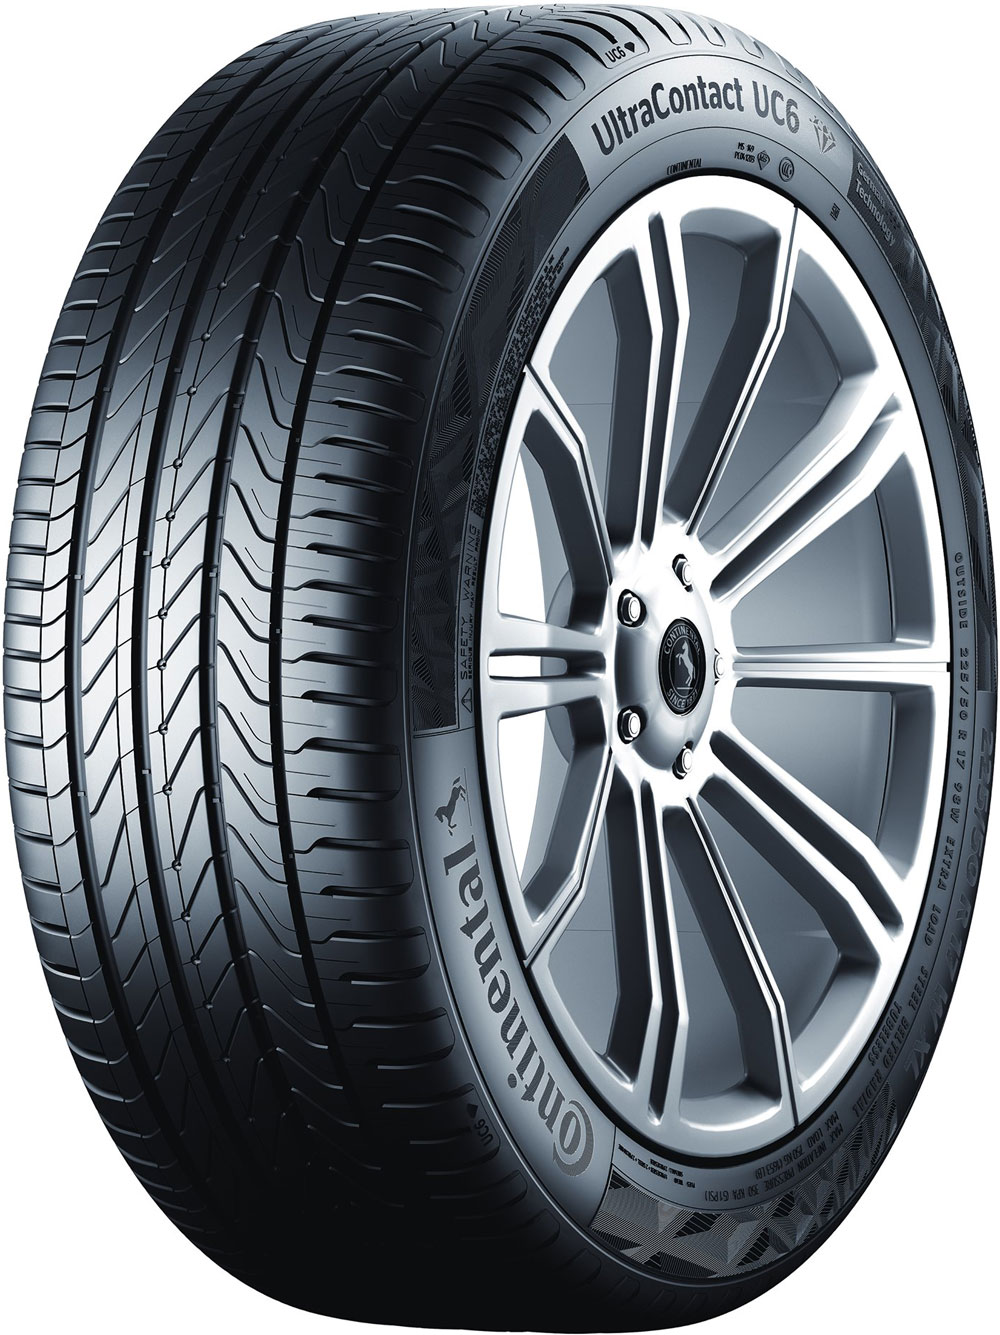 CONTINENTAL UltraContact XL FP 215/50 R17 95W